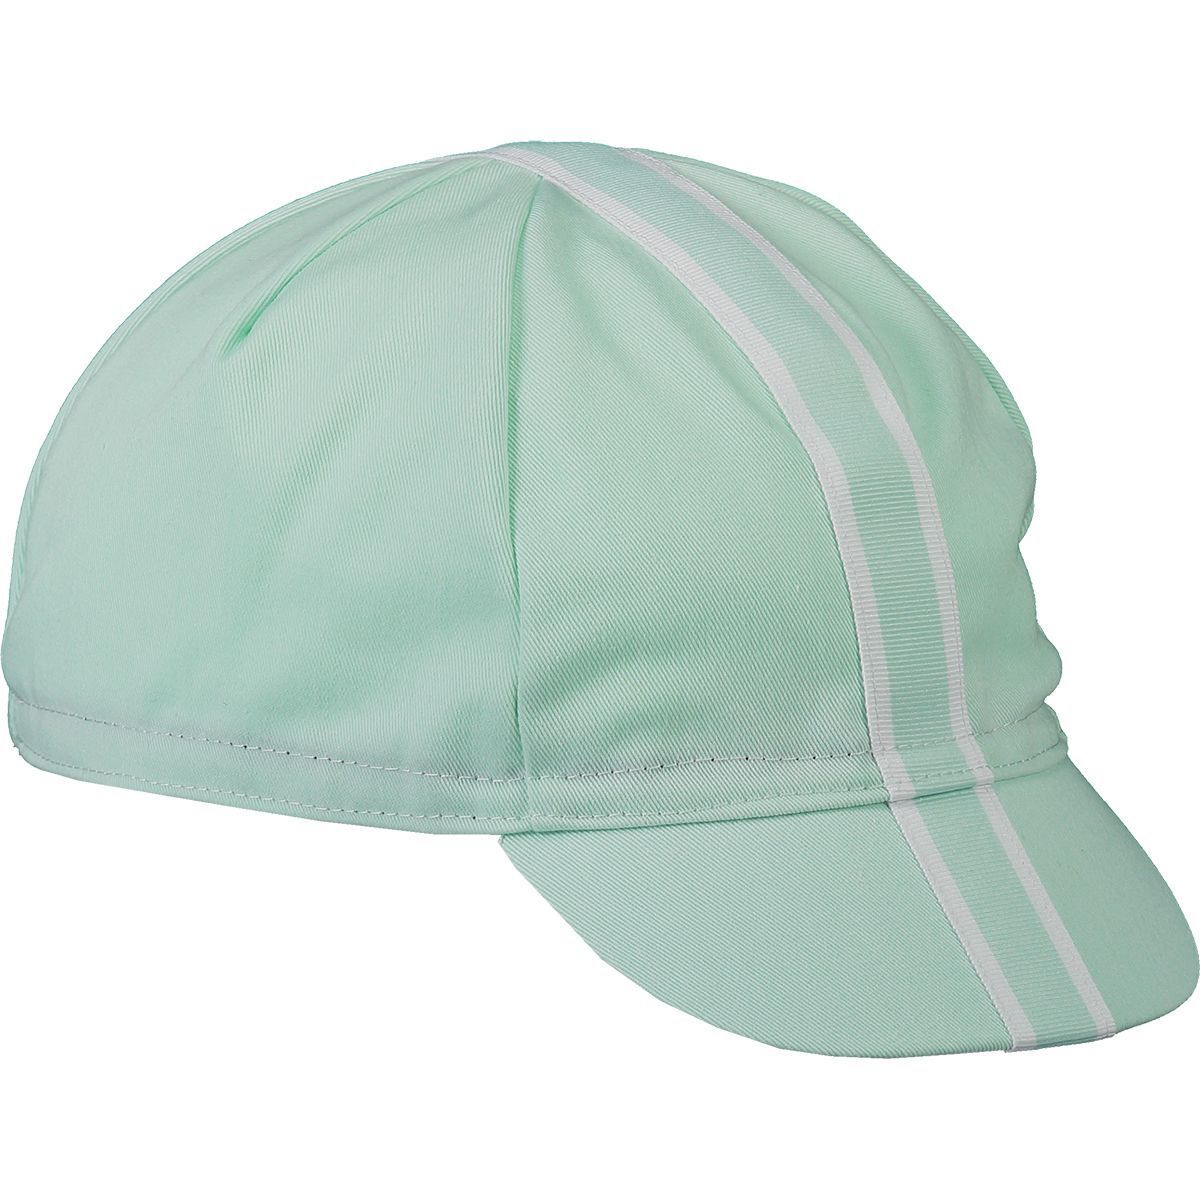 best cycling cap for hot weather